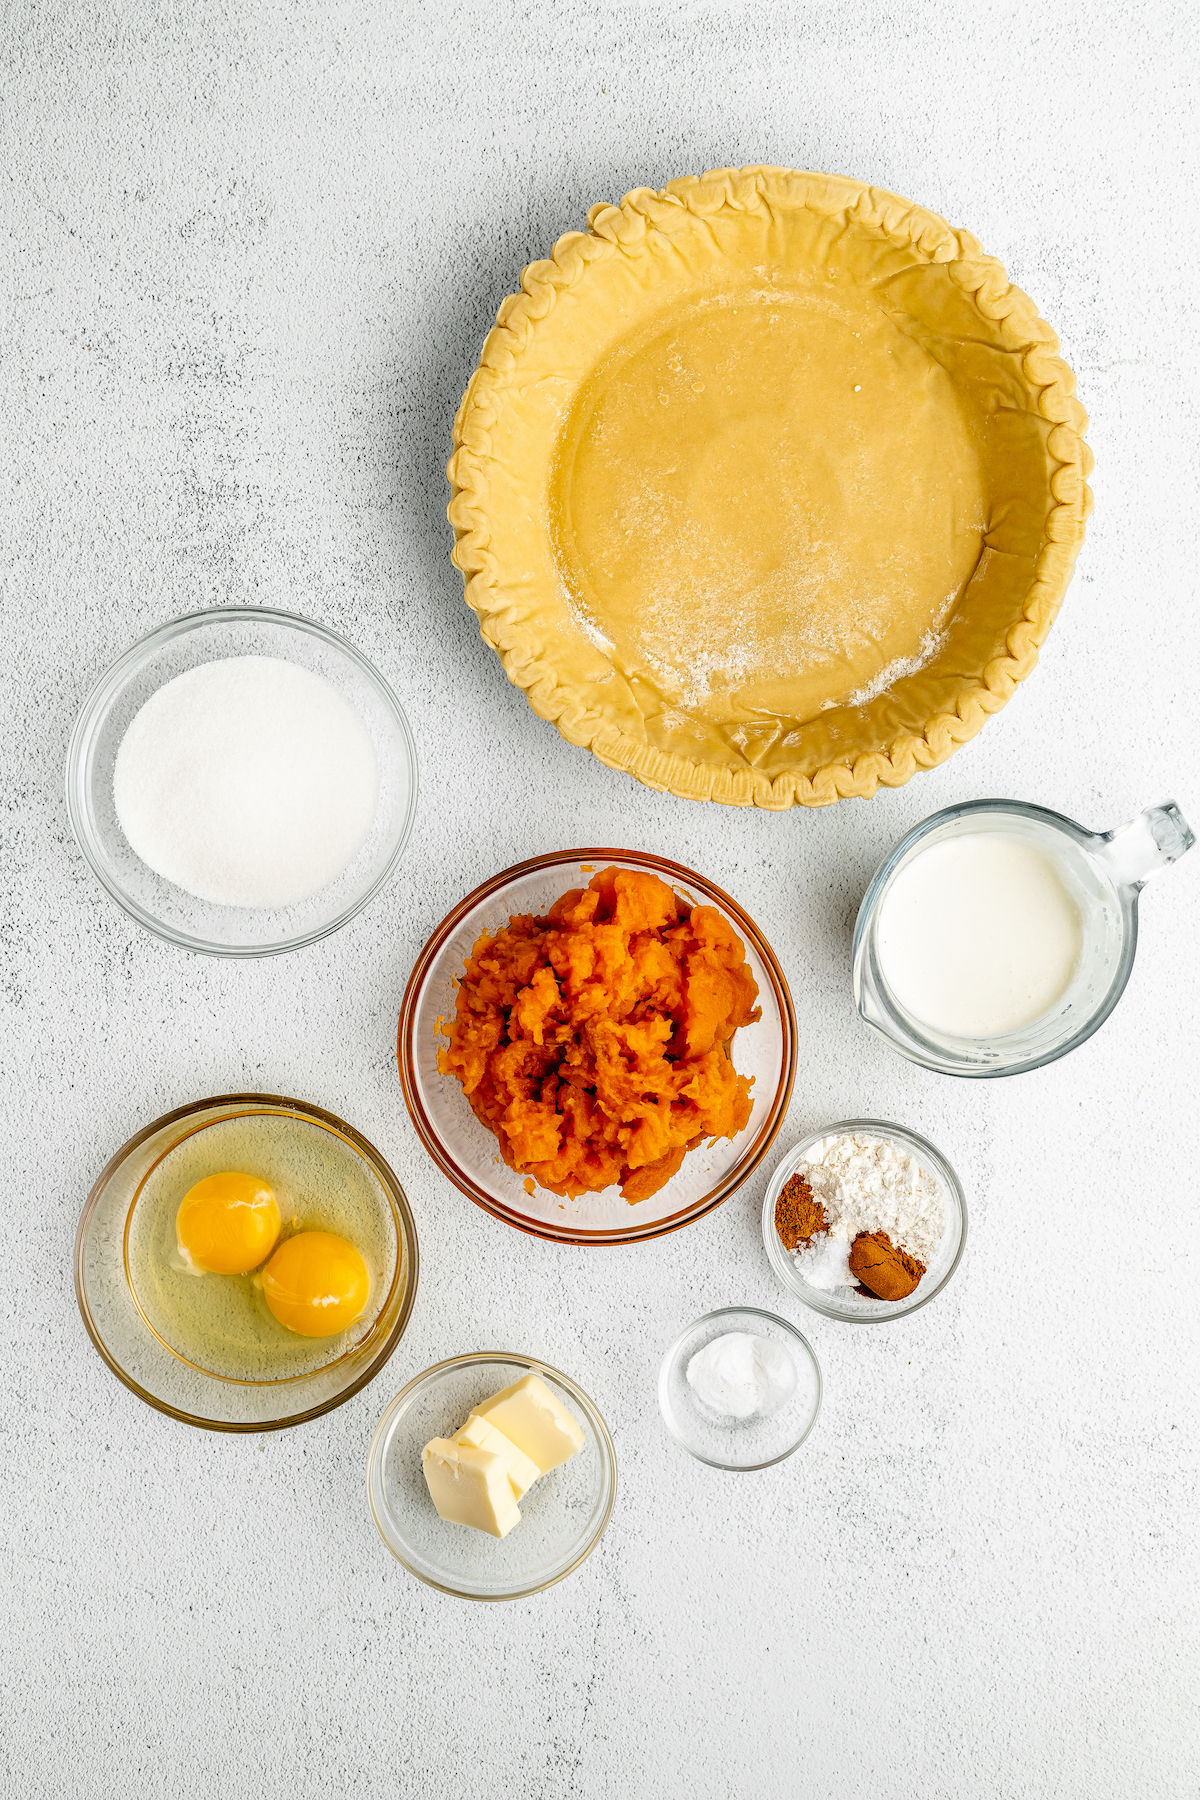 An unbaked pie crust, buttermilk, sweet potato puree, sugar, eggs, butter, salt, cinnamon, nutmeg and baking soda laid out on the counter.